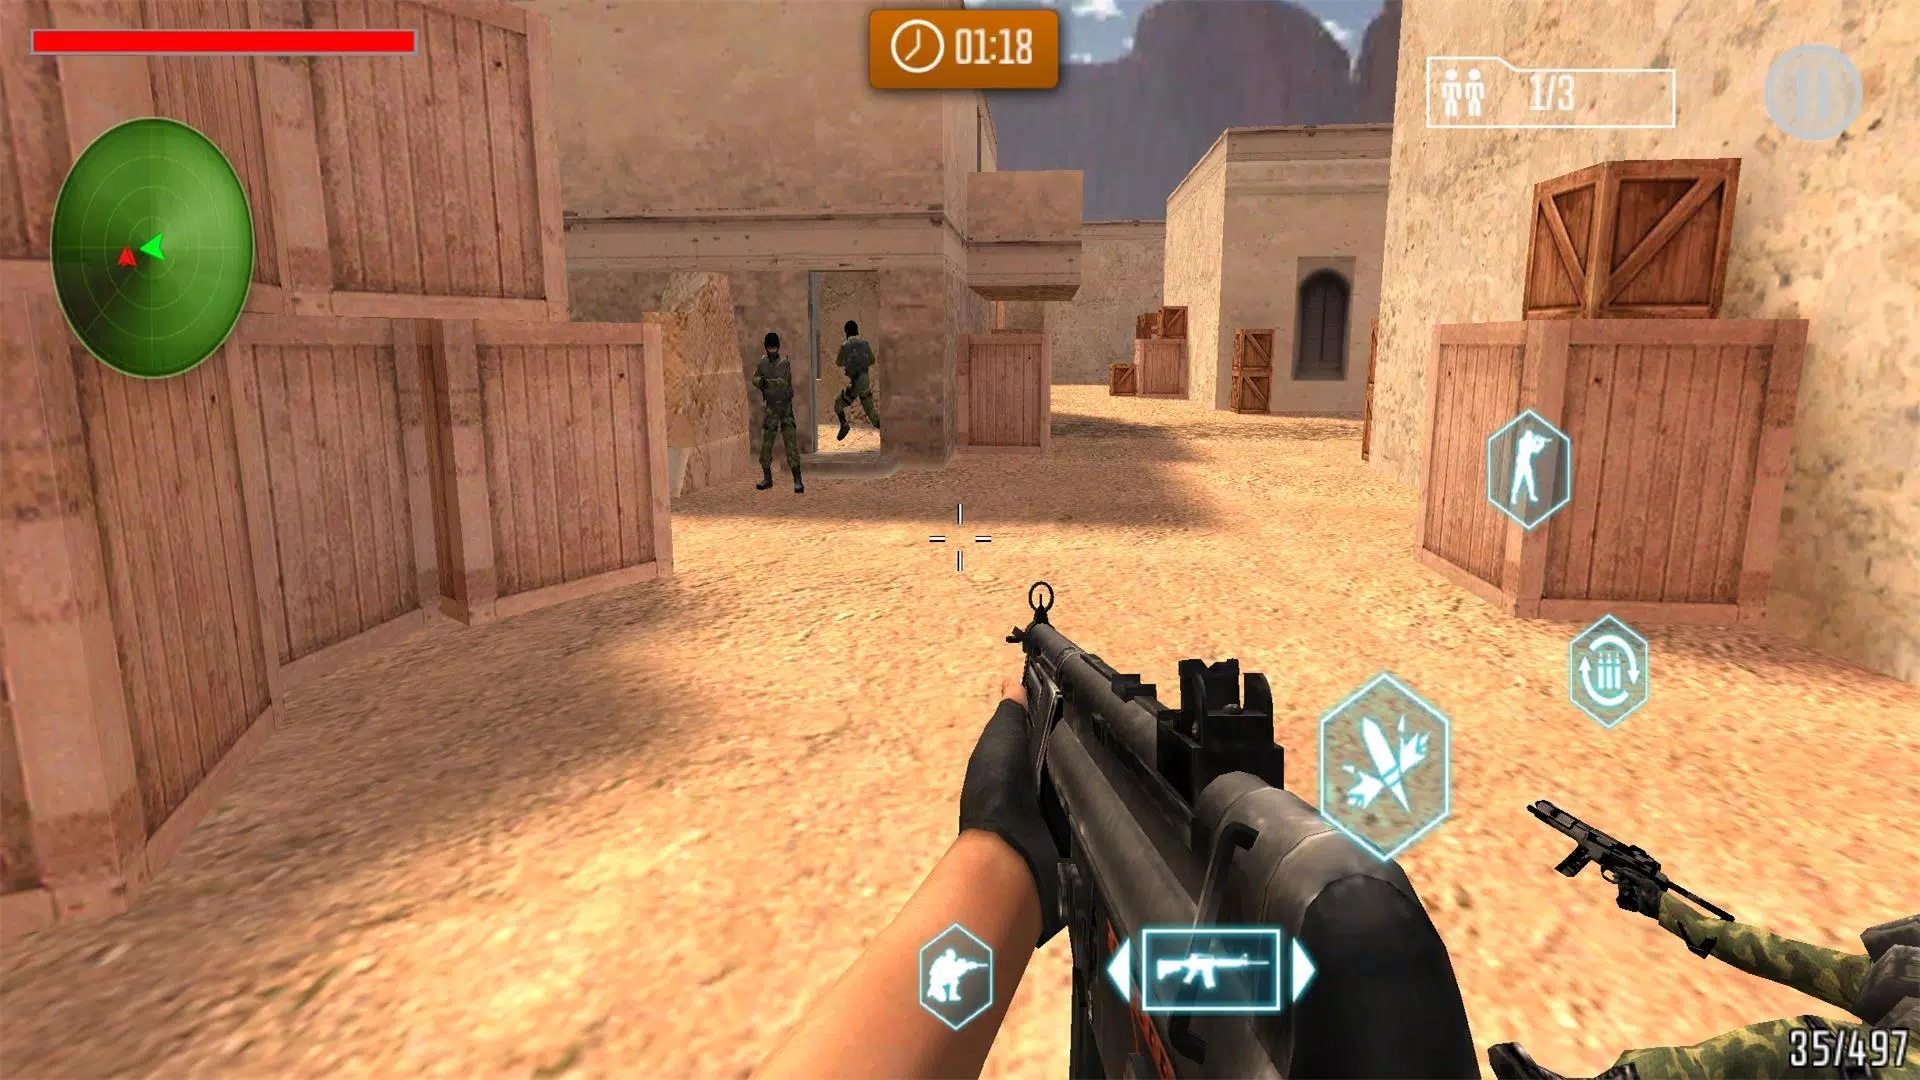 King of Gun Master for Android - APK Download